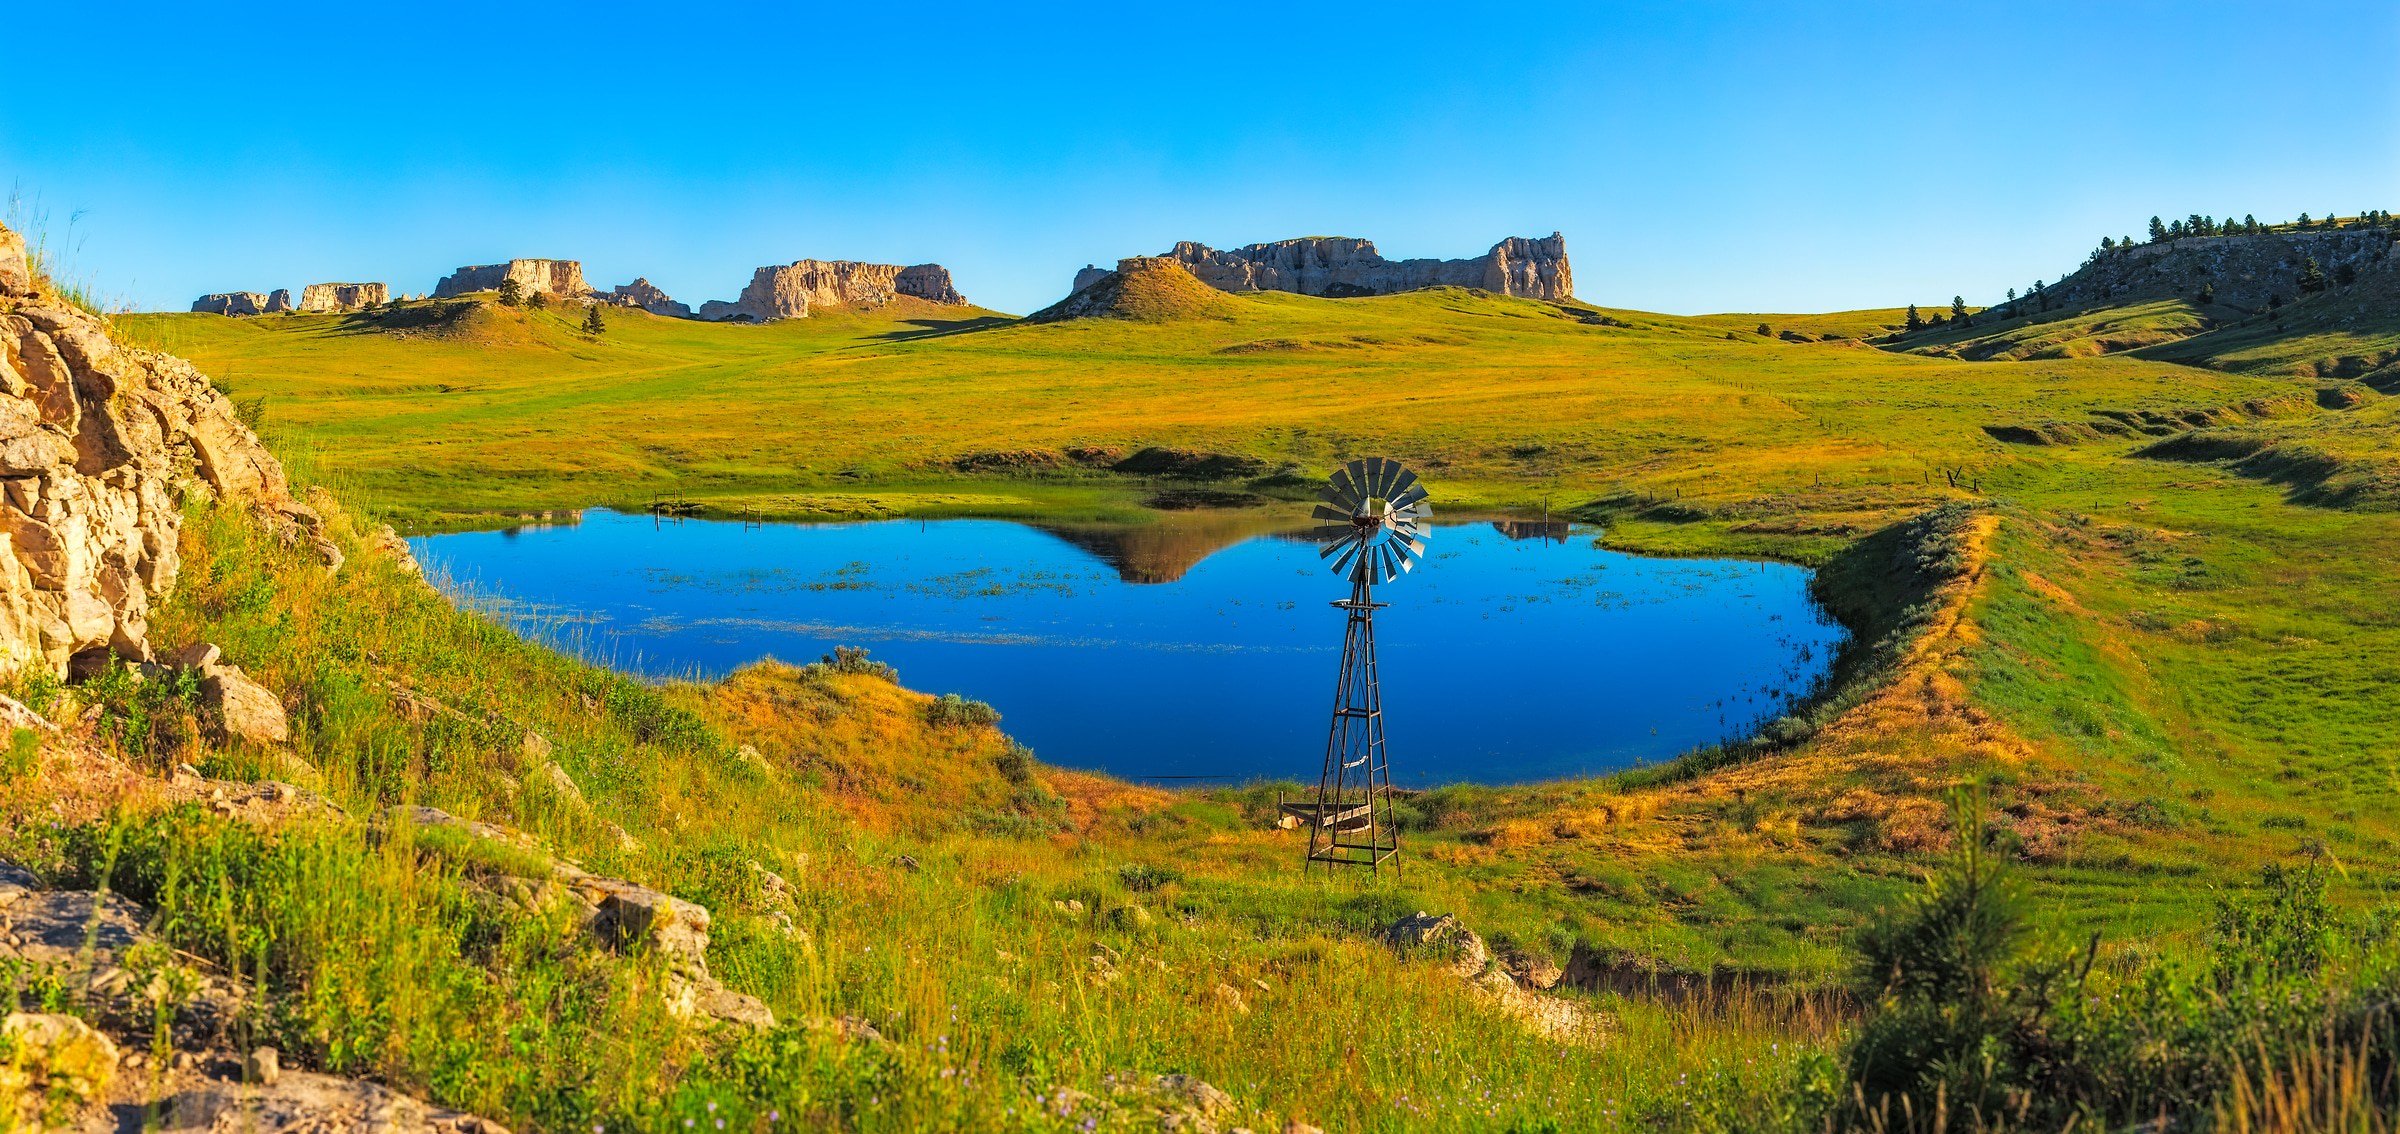 619 megapixels! A very high resolution, large-format VAST photo print of a Wyoming landscape with fields, a pond, and a windmill; photograph created by John Freeman in Keeline, Wyoming.